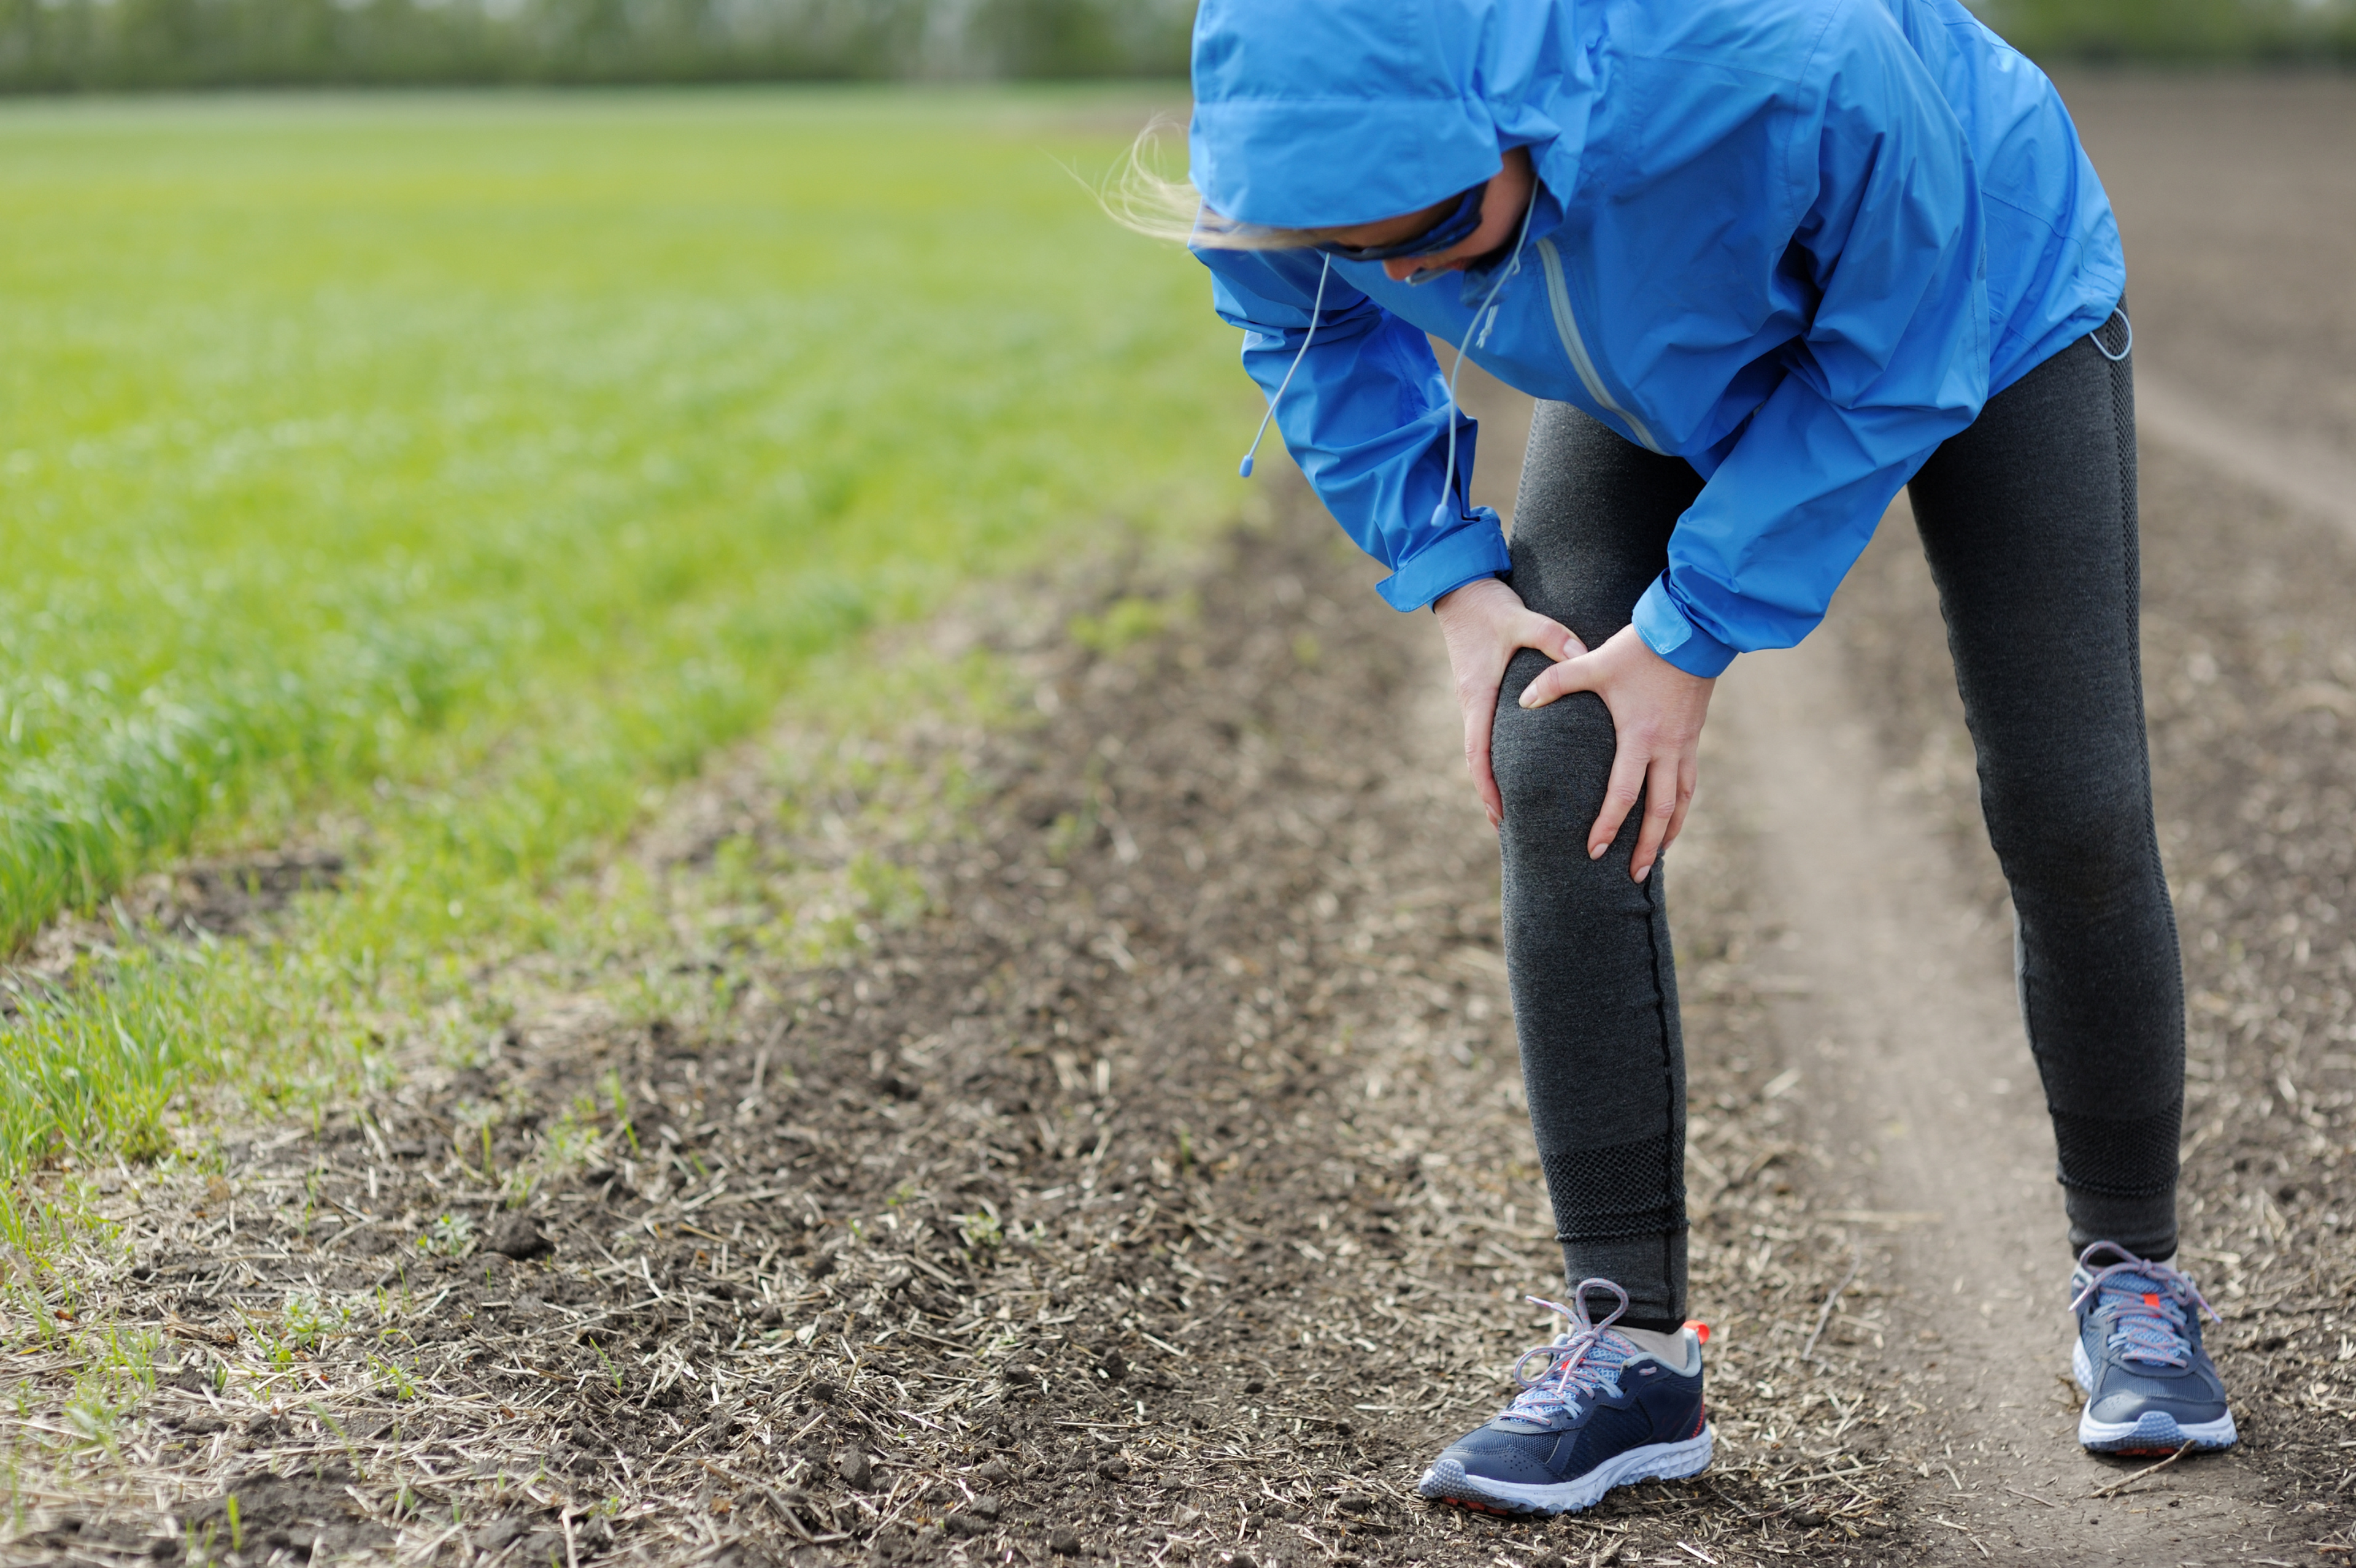 The most common cause for a meniscus tear in running is a sudden knee twist.